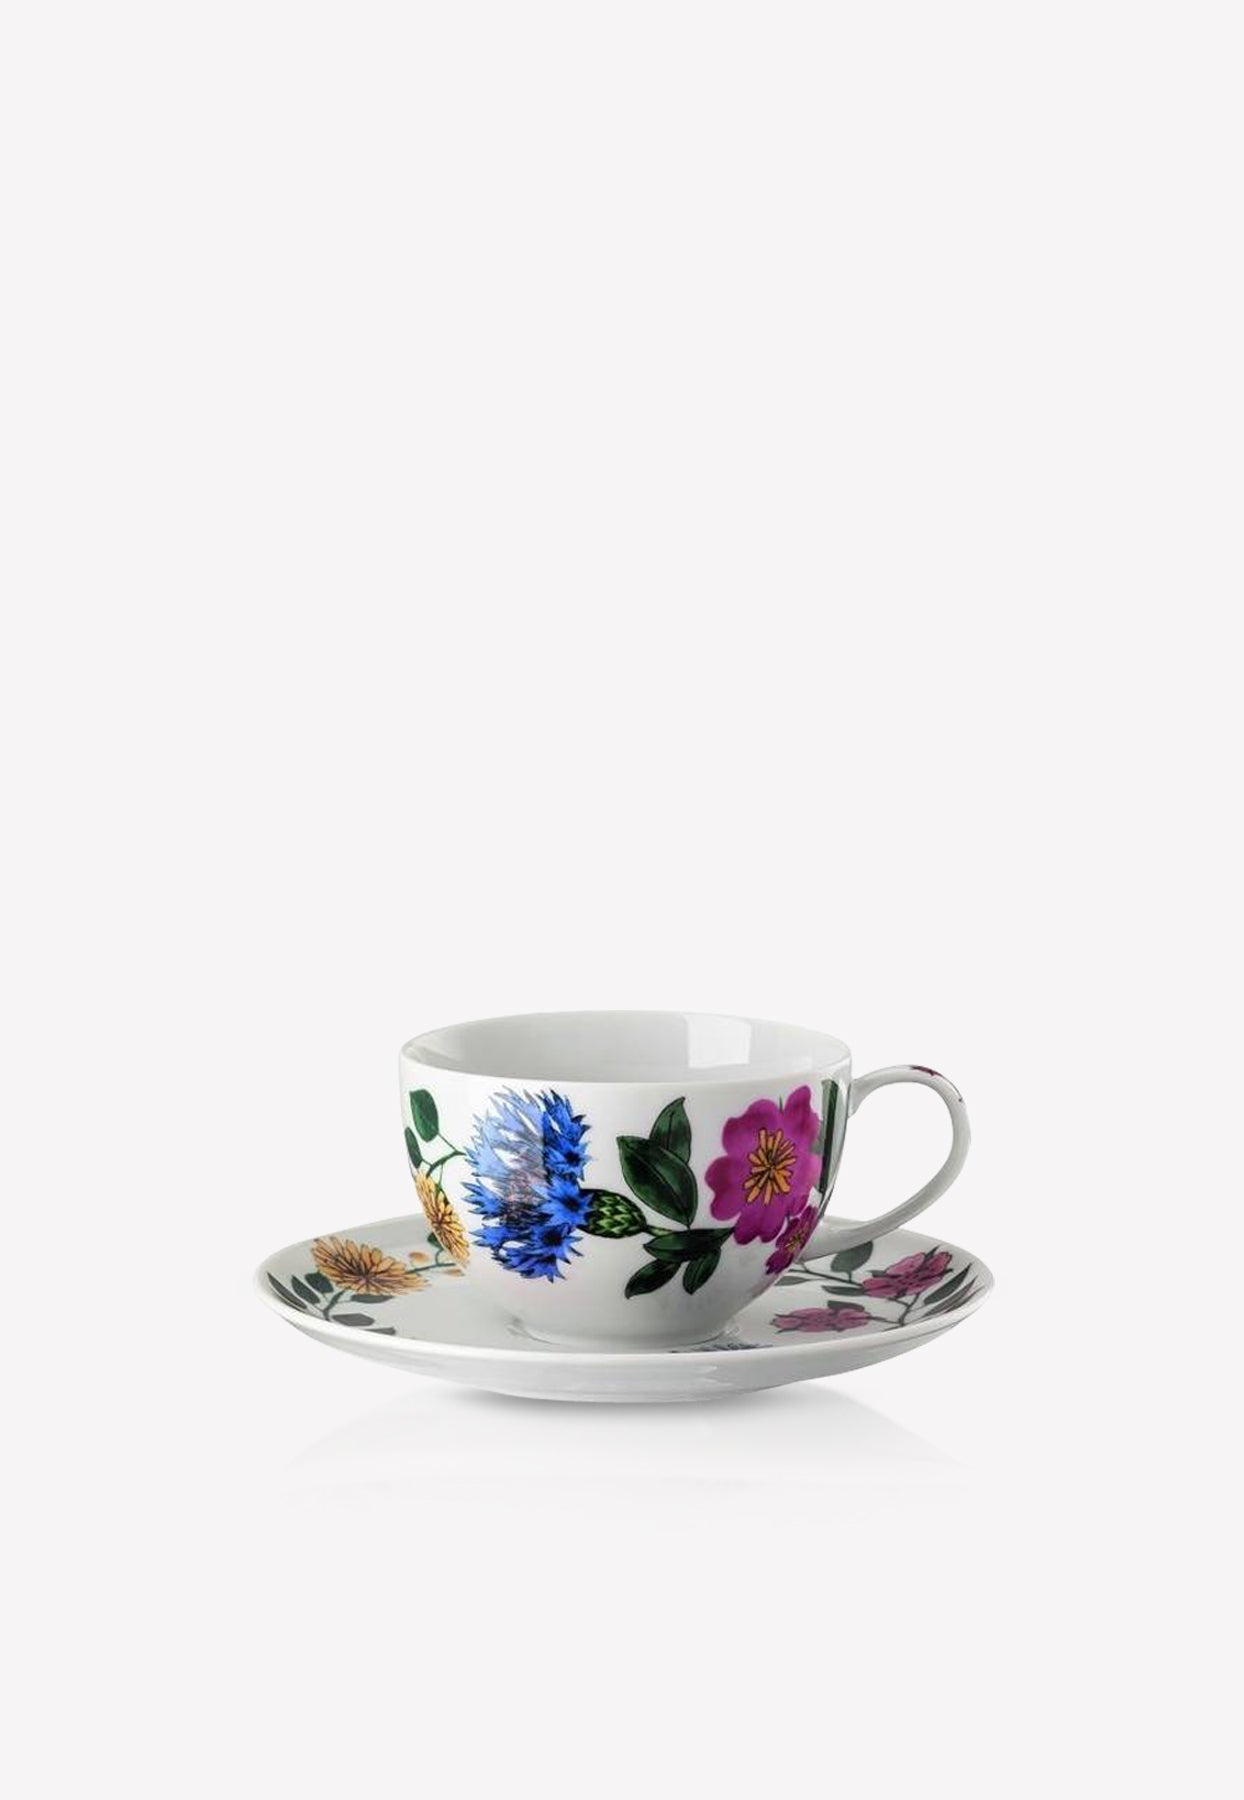 Rosenthal Blossom Cappuccino Cups And Saucer - Set Of 6 In White